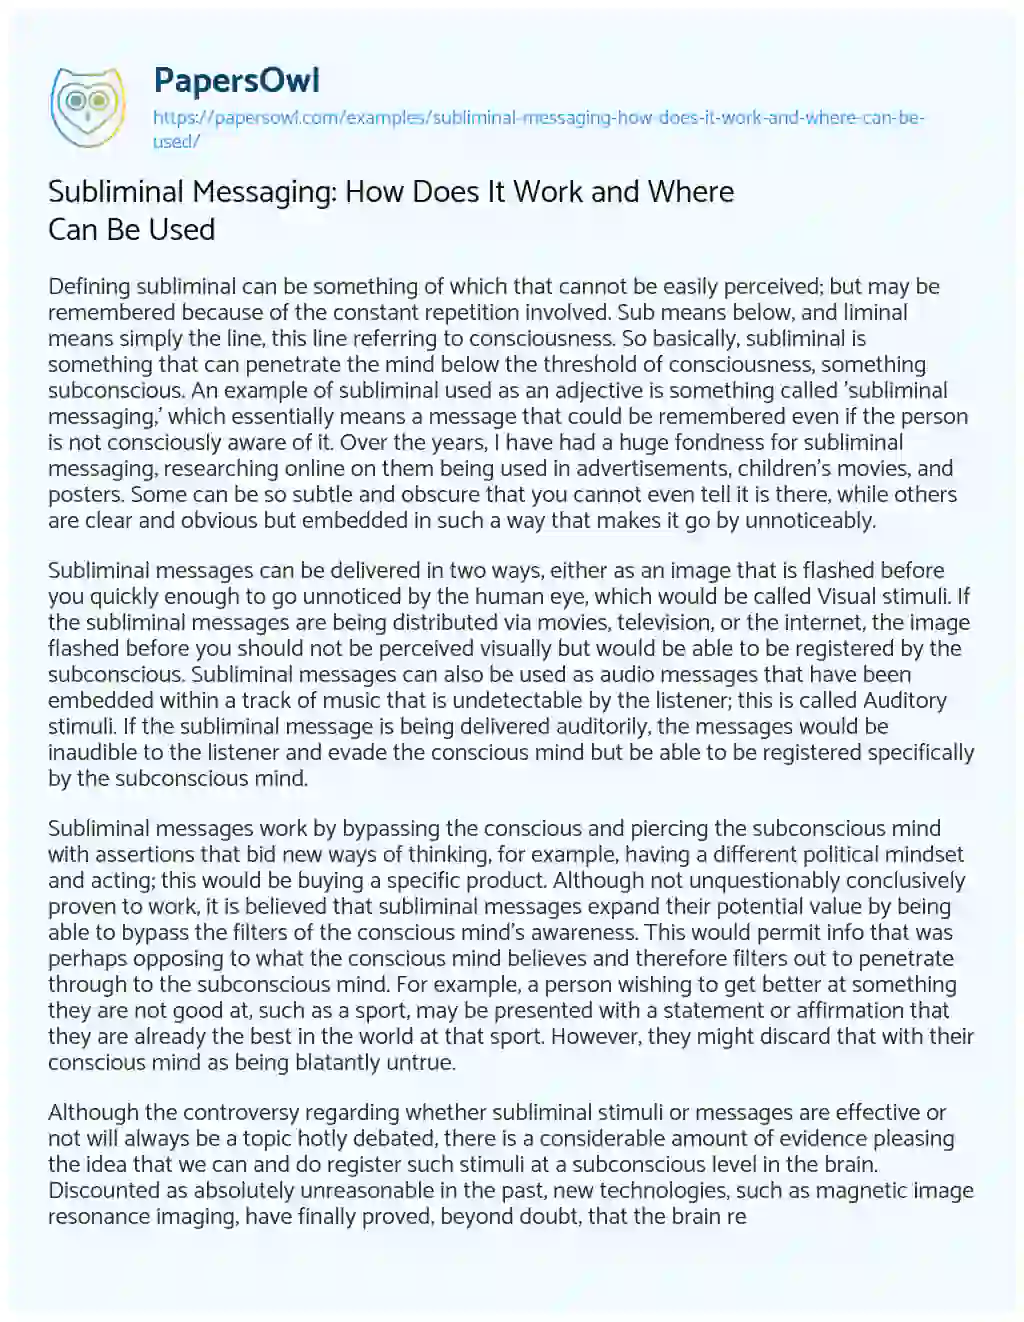 Essay on Subliminal Messaging: how does it Work and where Can be Used